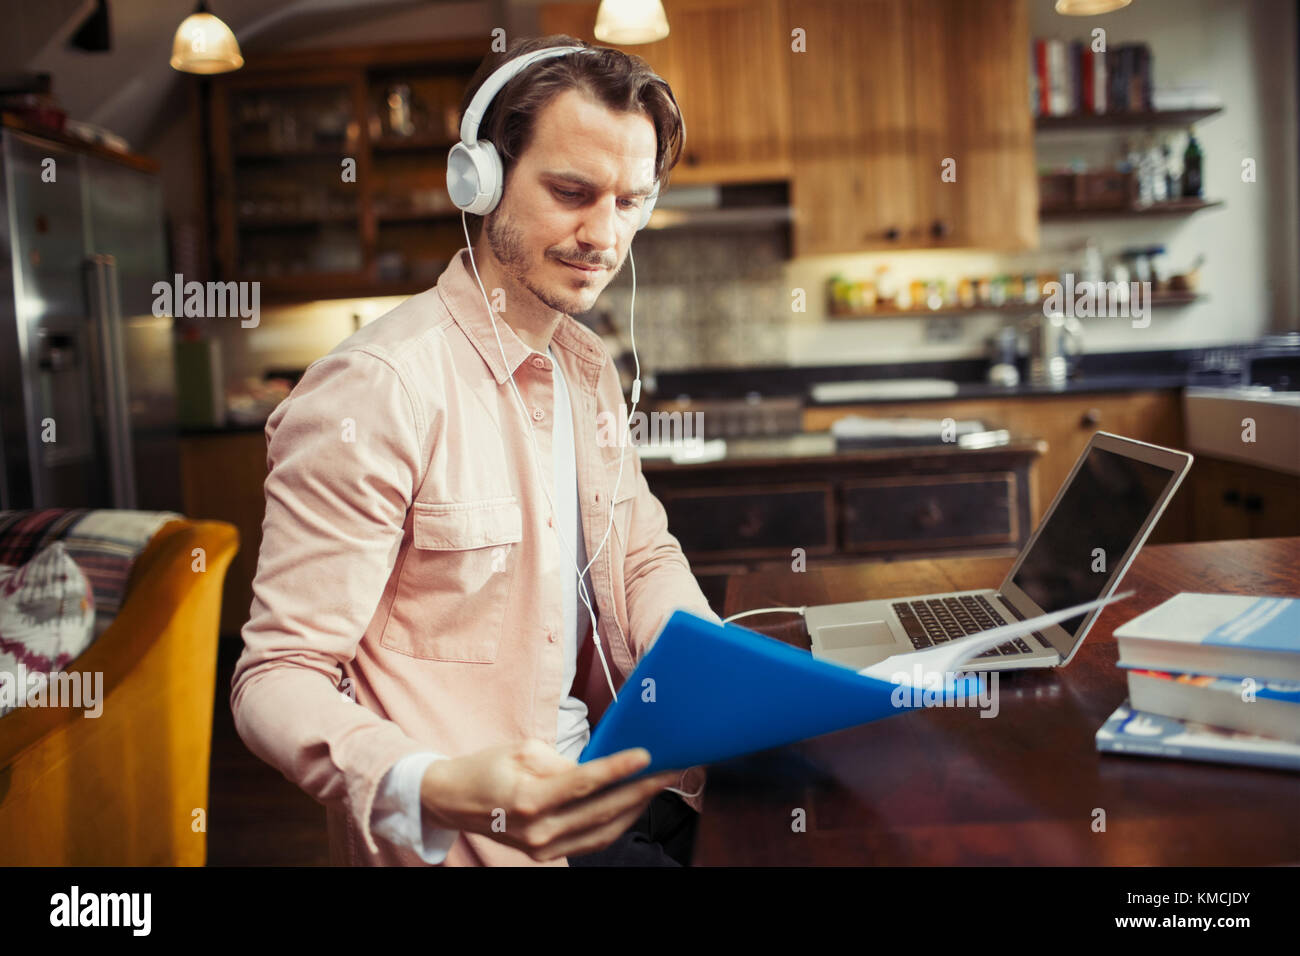 Man with headphones working at laptop, reading paperwork in kitchen Stock Photo